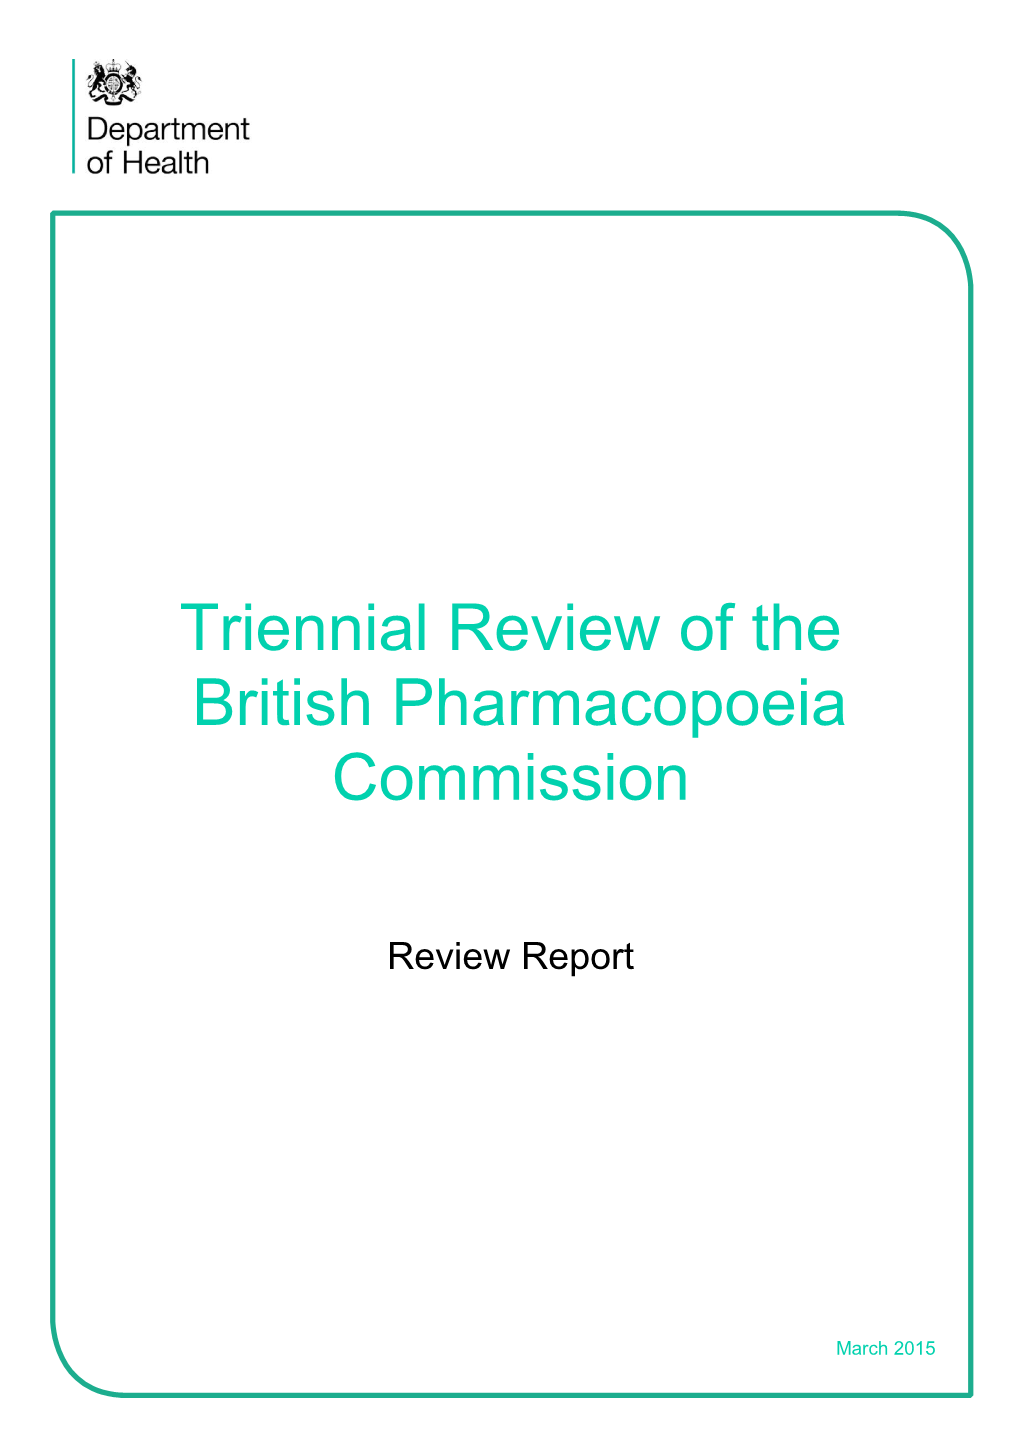 Triennial Review of the British Pharmacopoeia Commission